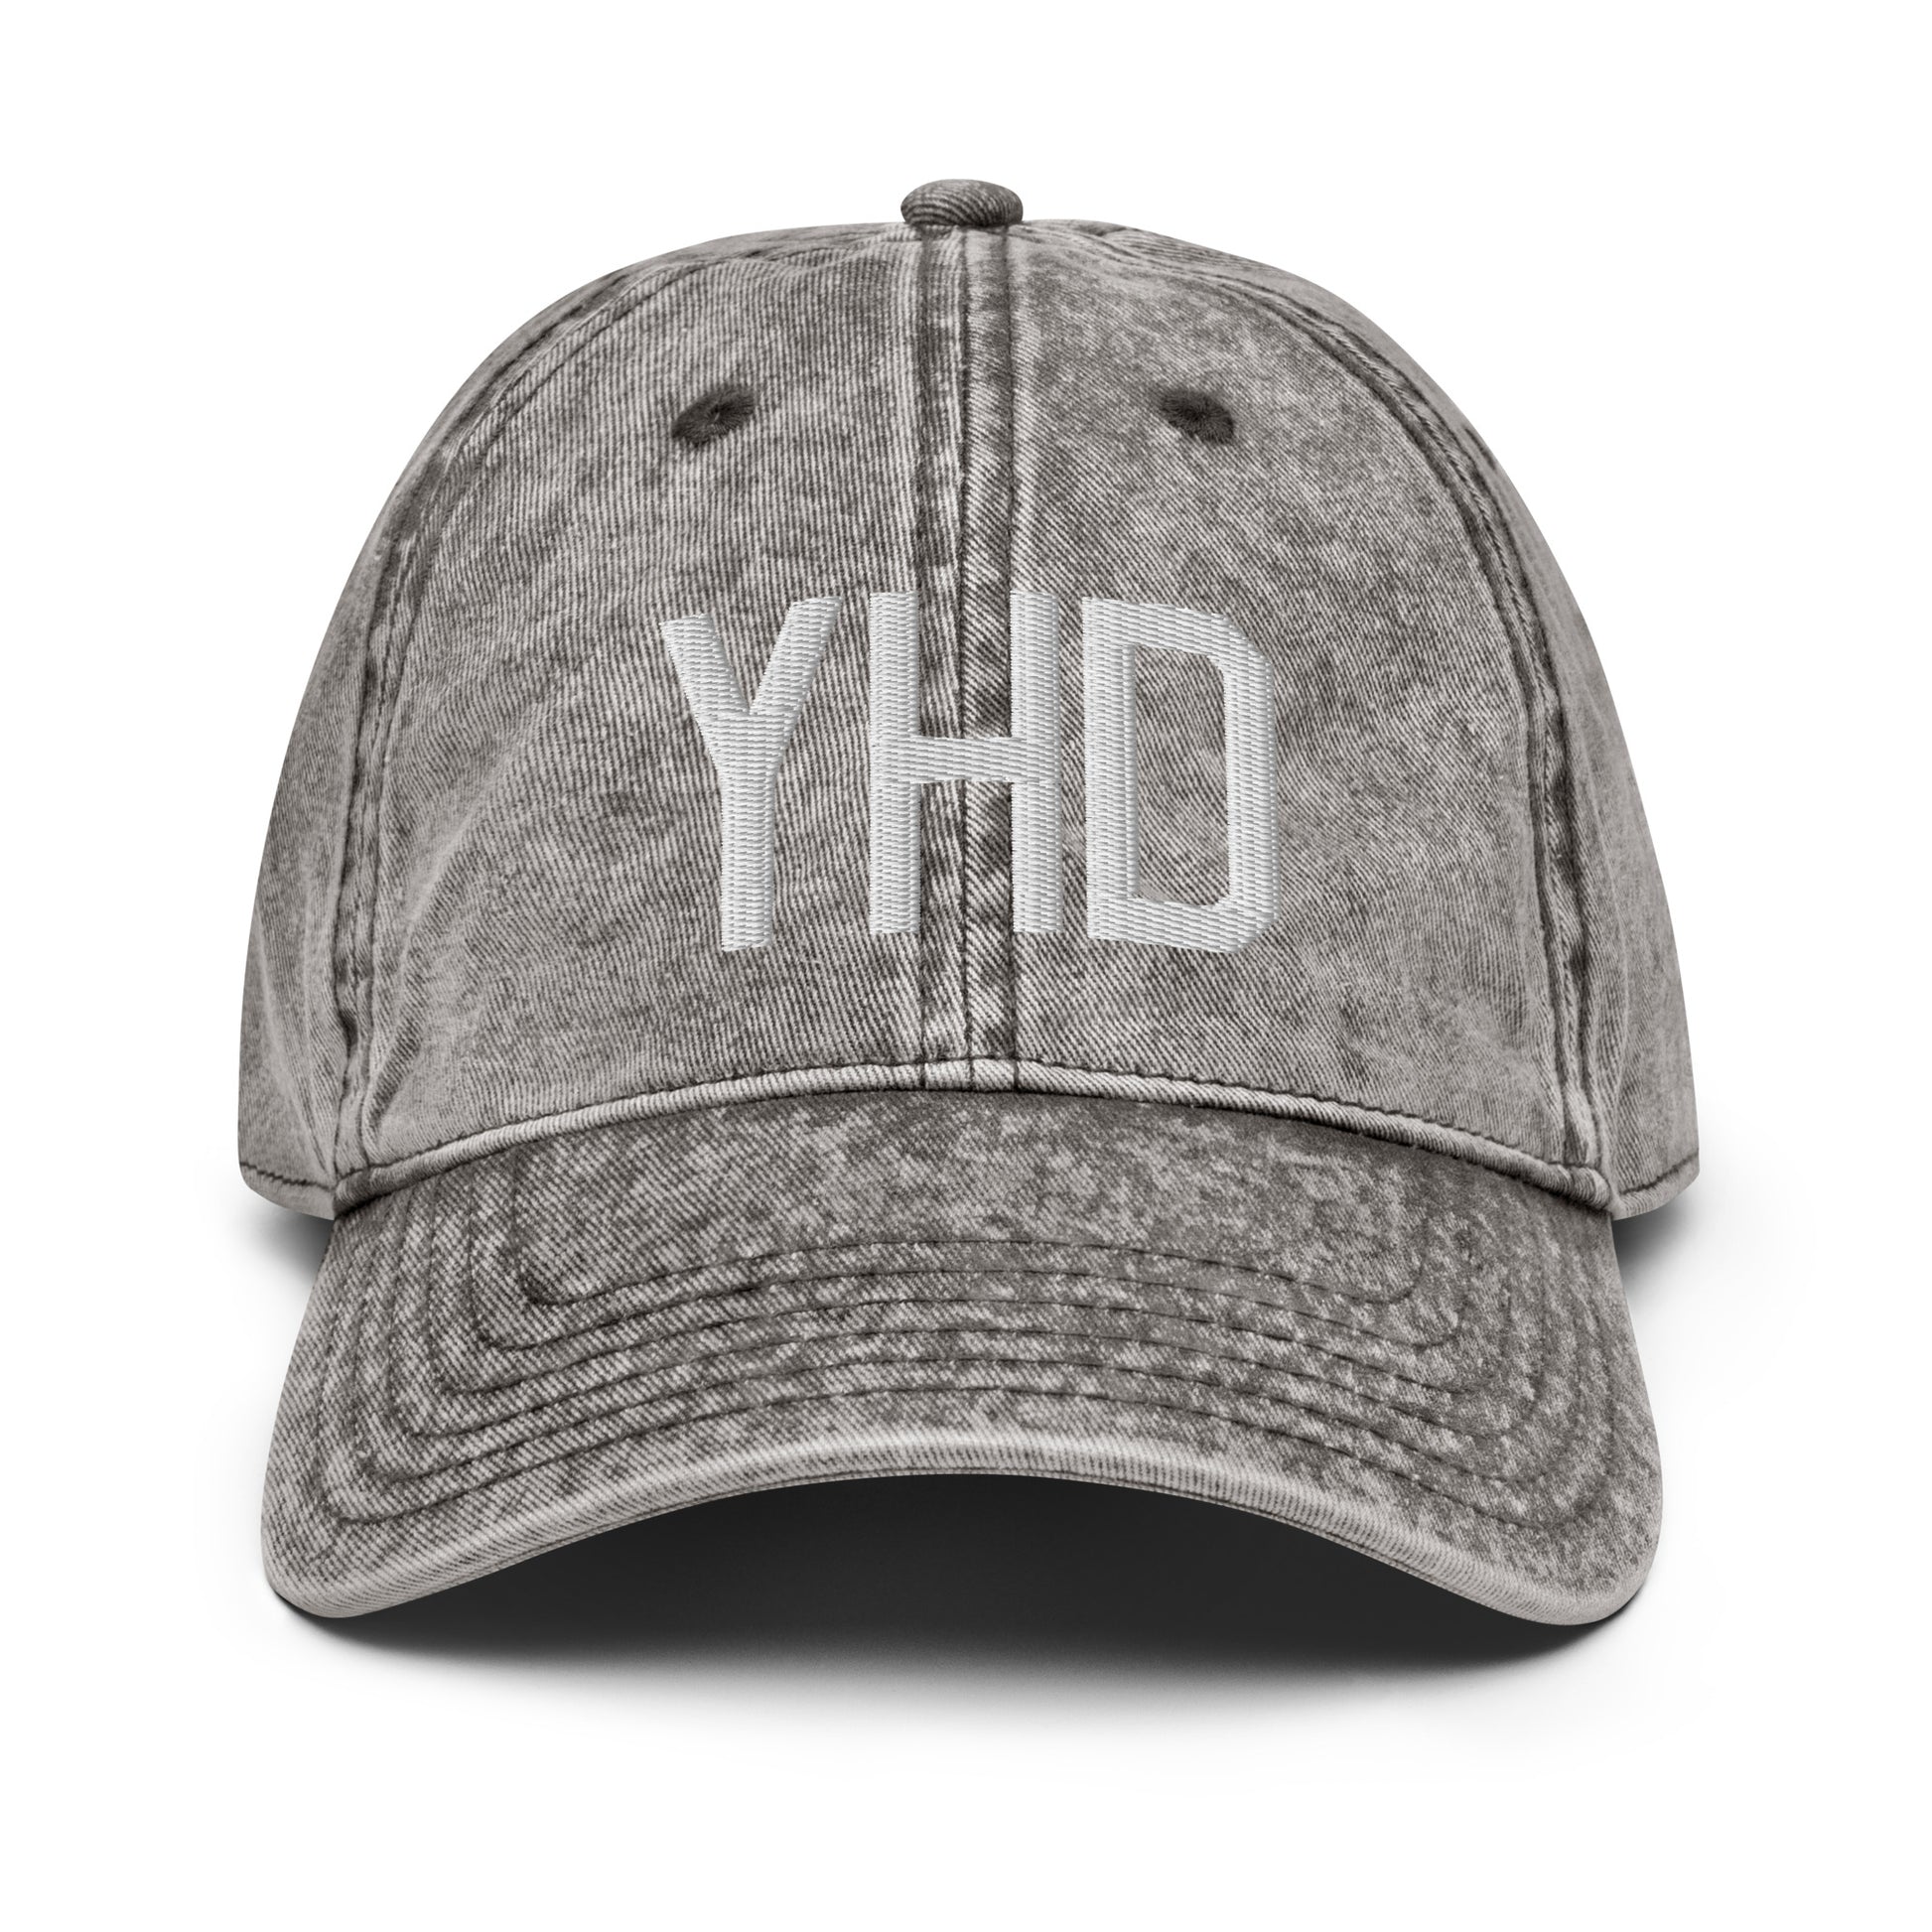 Airport Code Twill Cap - White • YHD Dryden • YHM Designs - Image 28